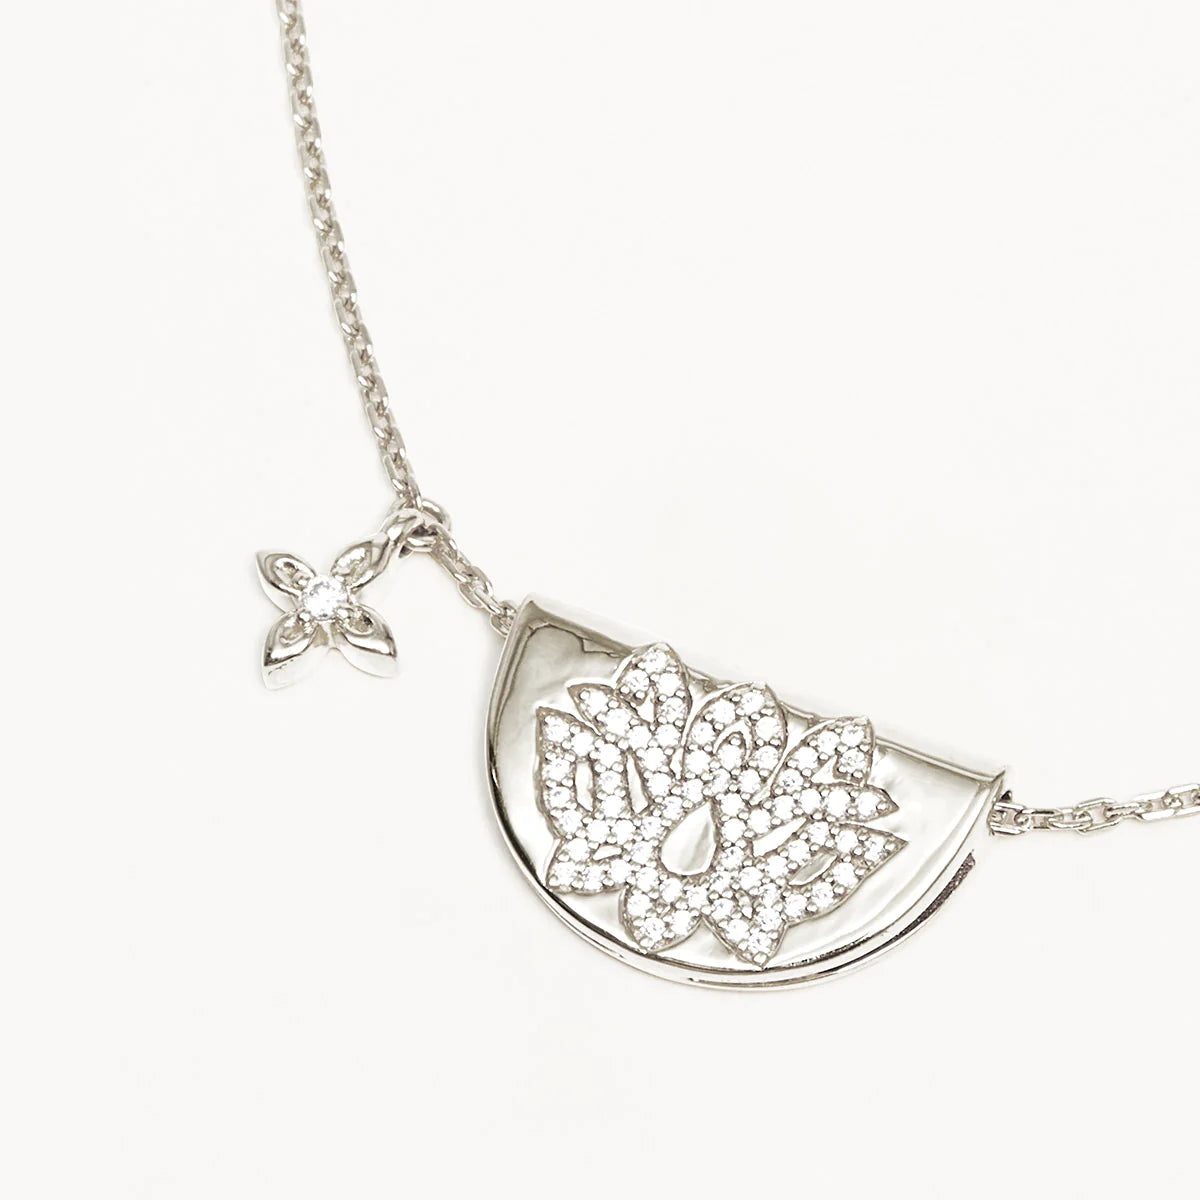 By Charlotte Live In Light Lotus Necklace - Sterling Silver